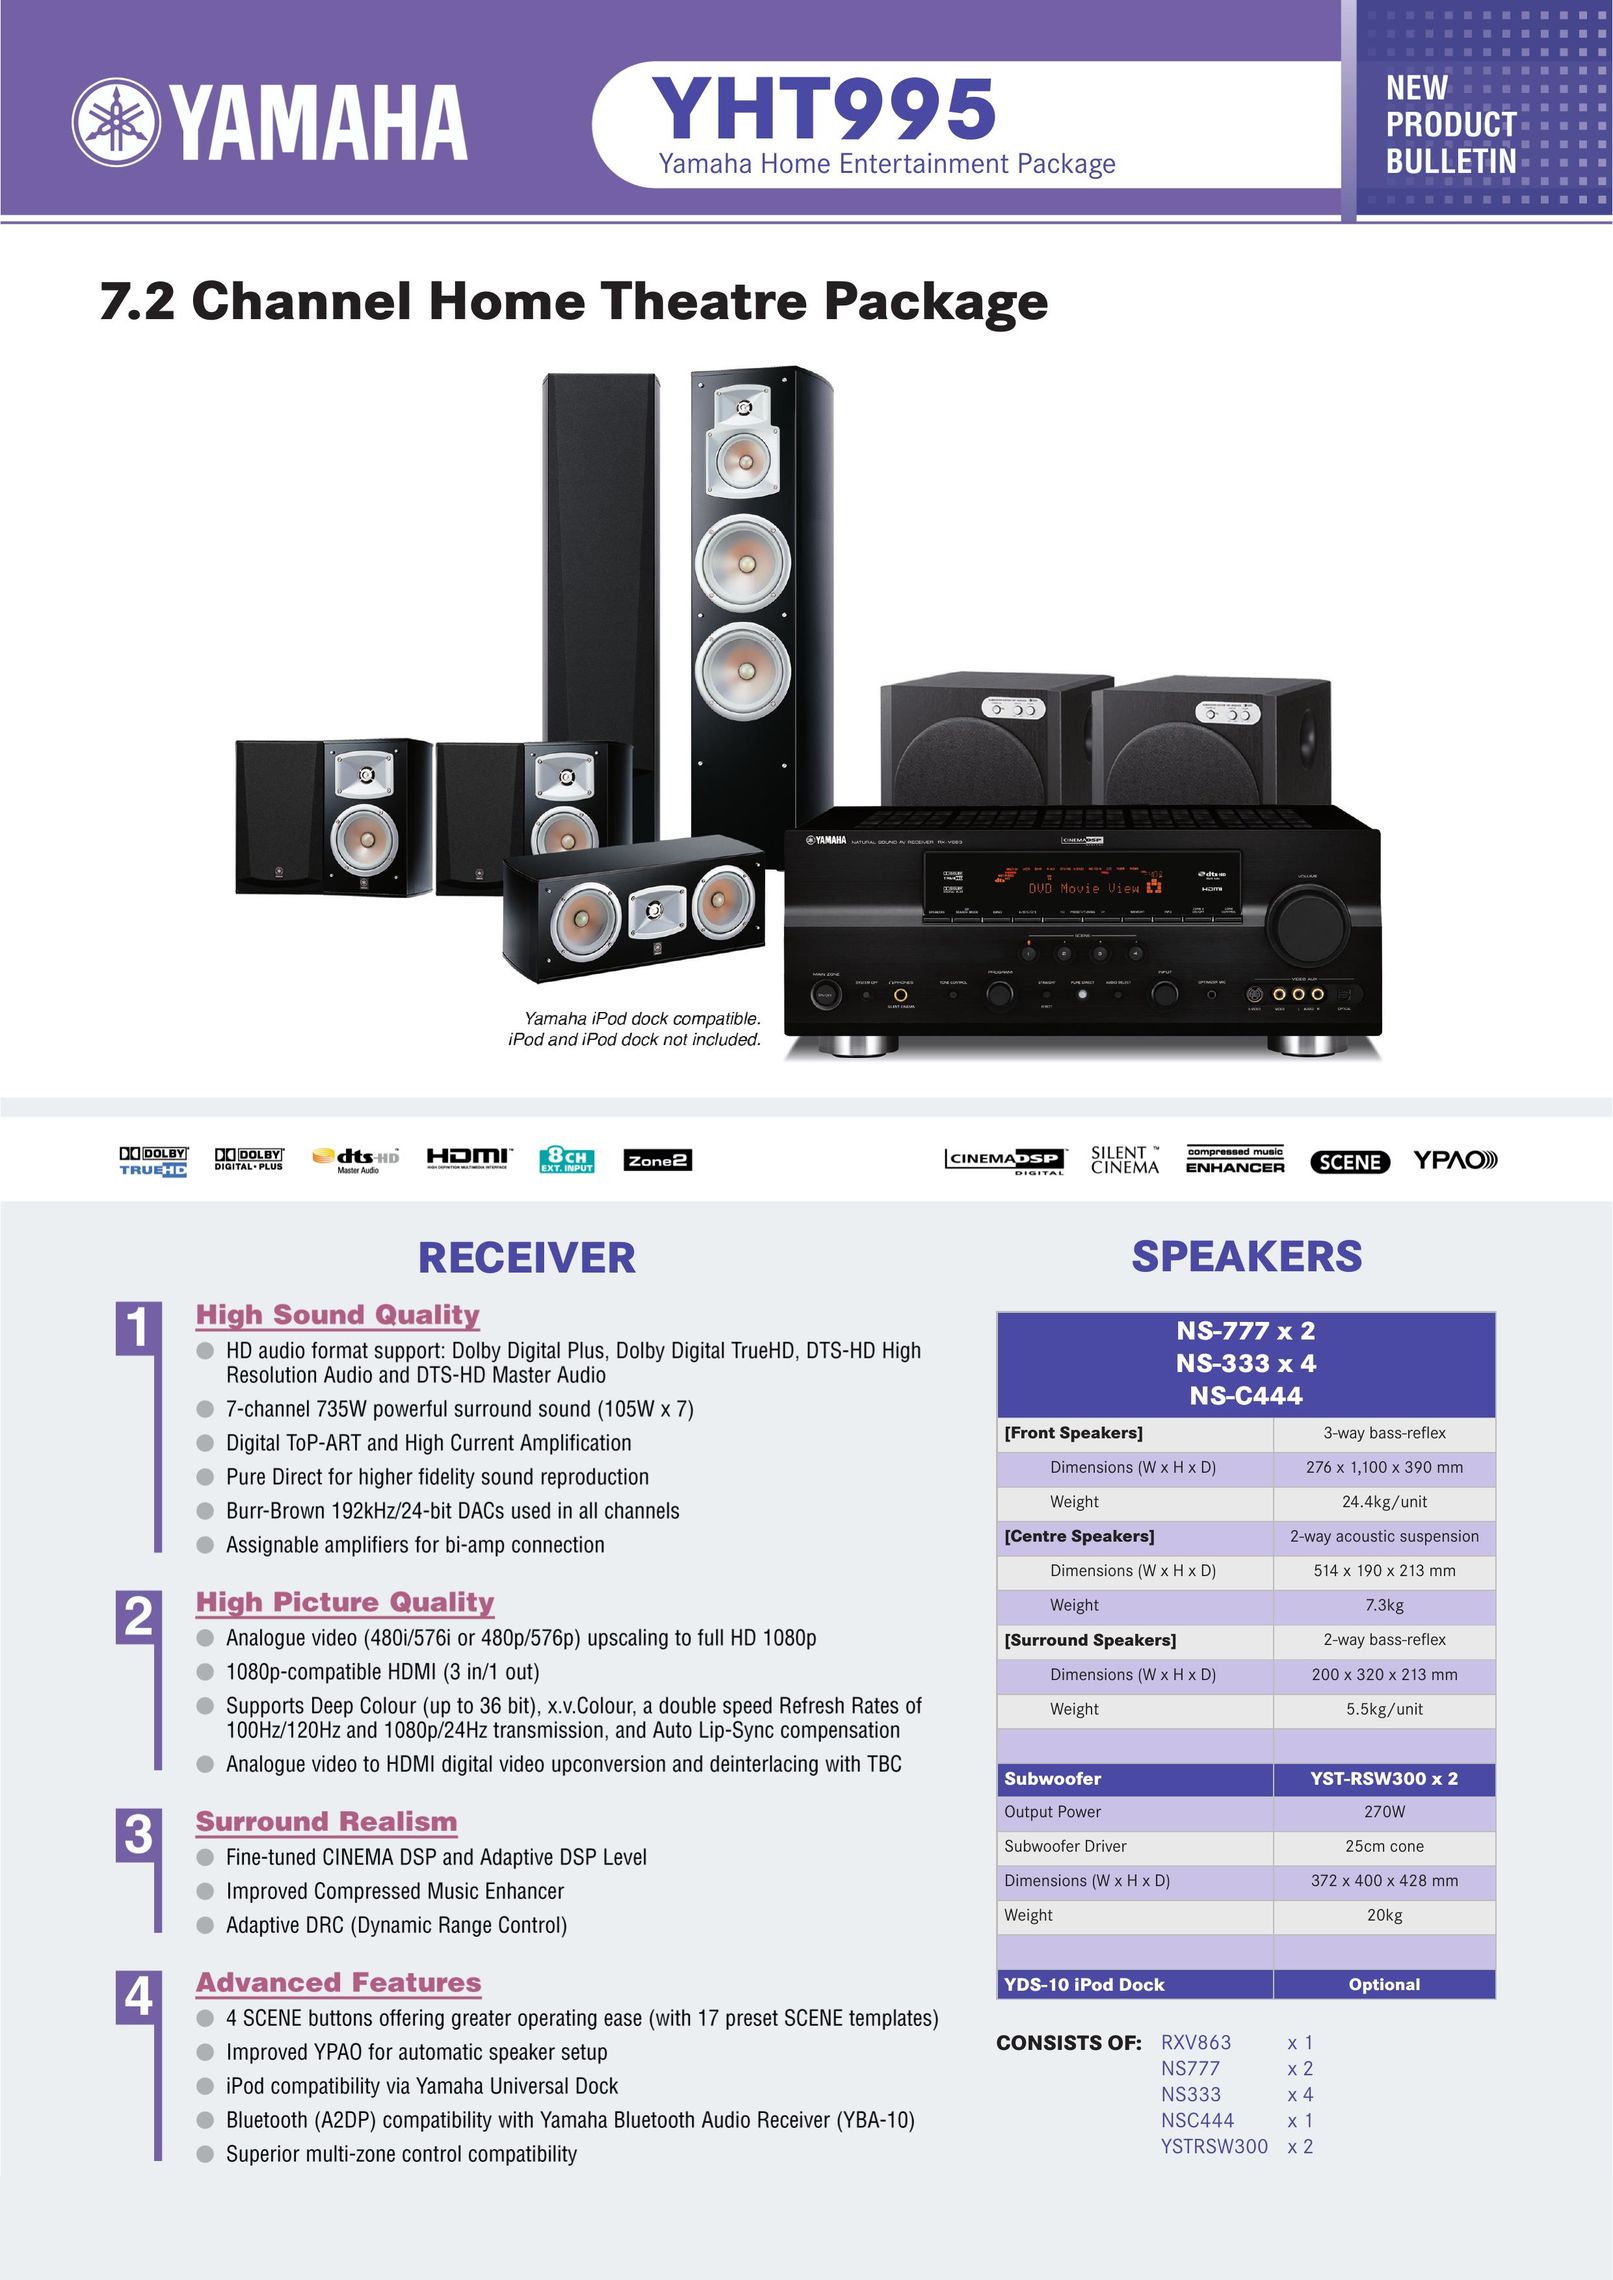 Yamaha YHT995 Home Theater System User Manual